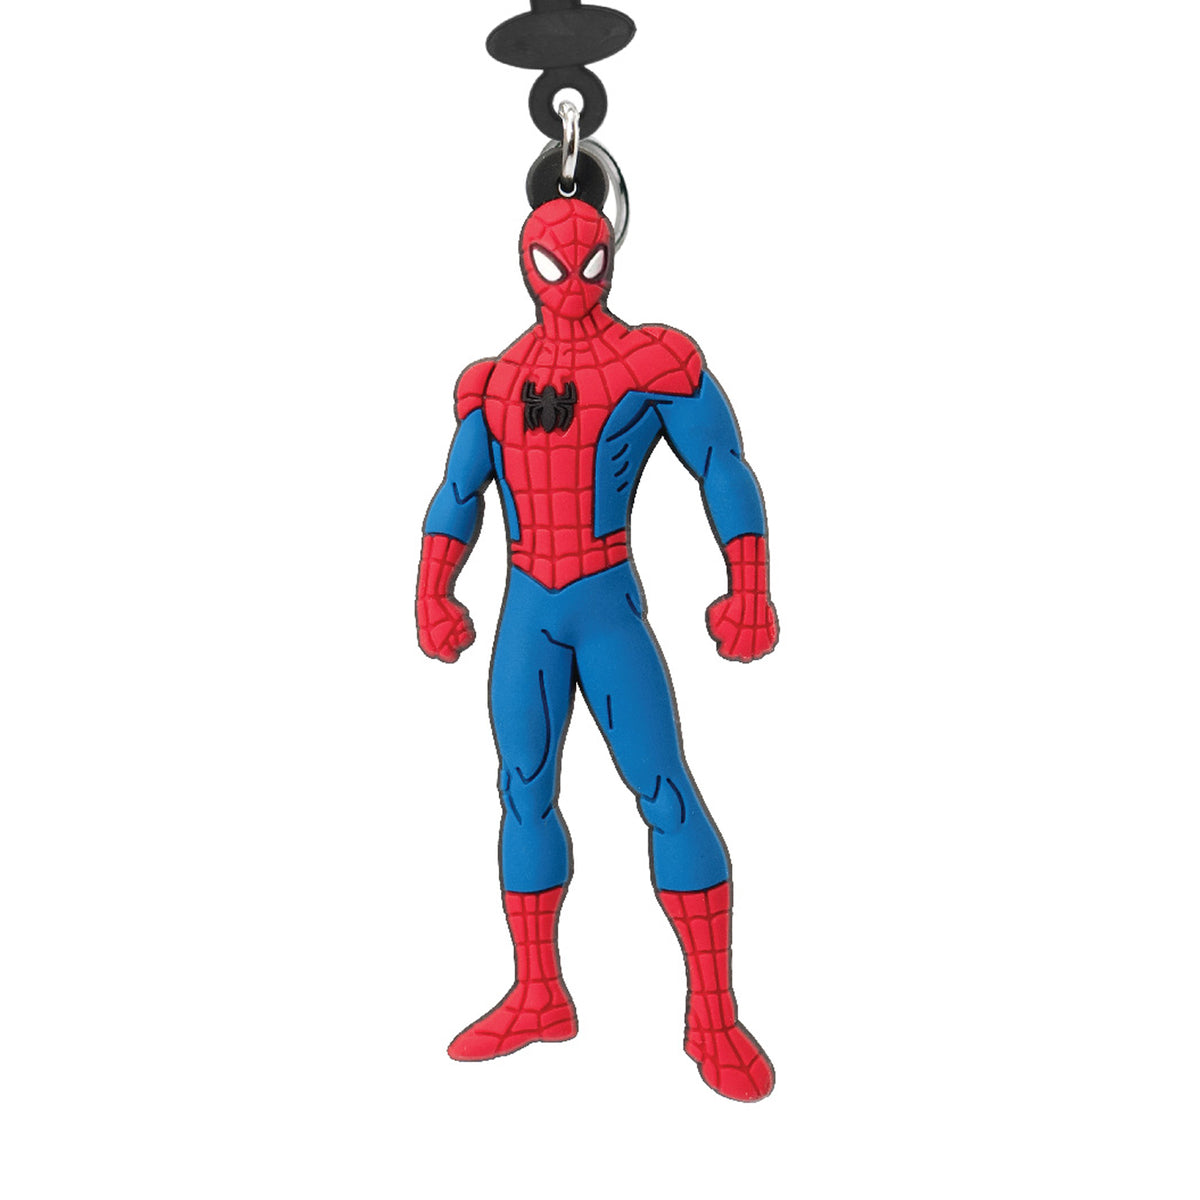 Marvel Spiderman Collectible Soft Touch Bag Clip/Luggage Charm